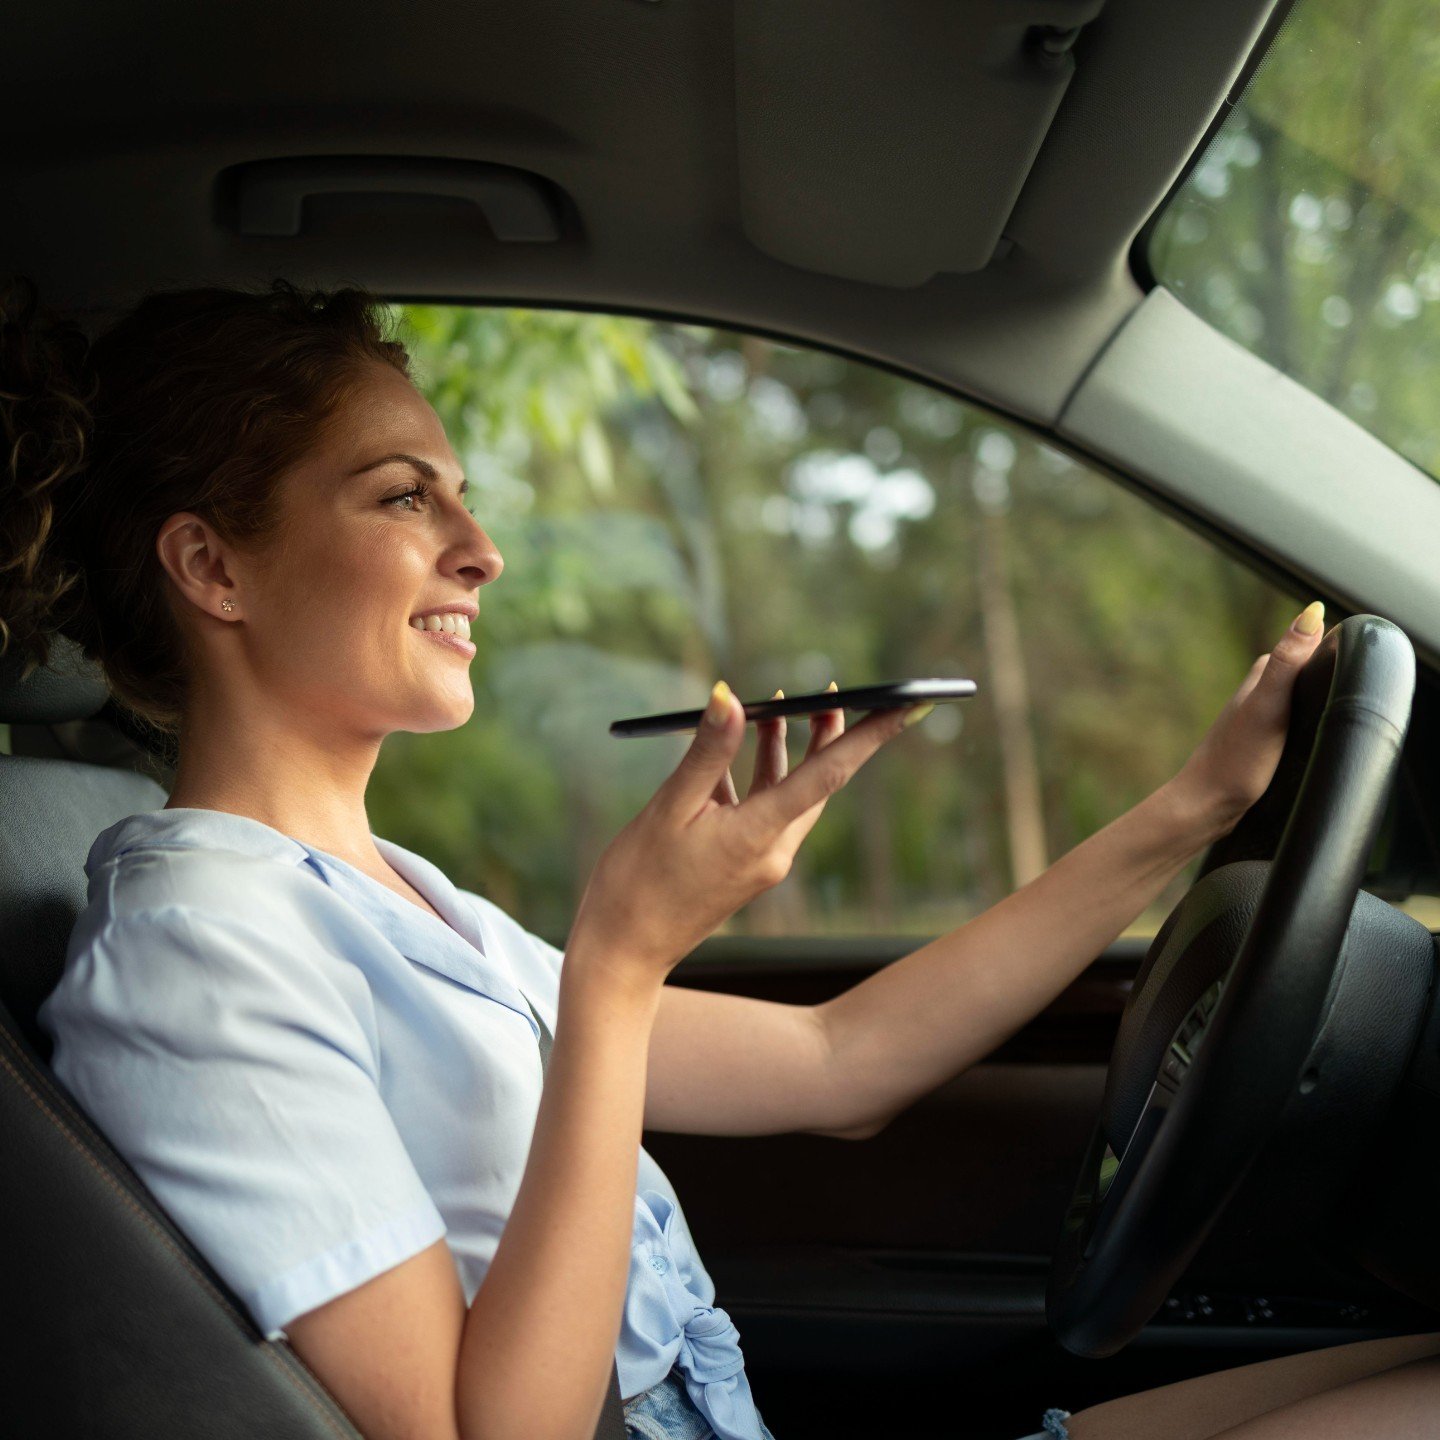 It's time to ditch the distracted driving! 

📱 If you struggle with the urge to check your phone or to text while you drive, activate your phone&rsquo;s &ldquo;Do Not Disturb&rdquo; feature or place your phone out of reach by putting it in the trunk